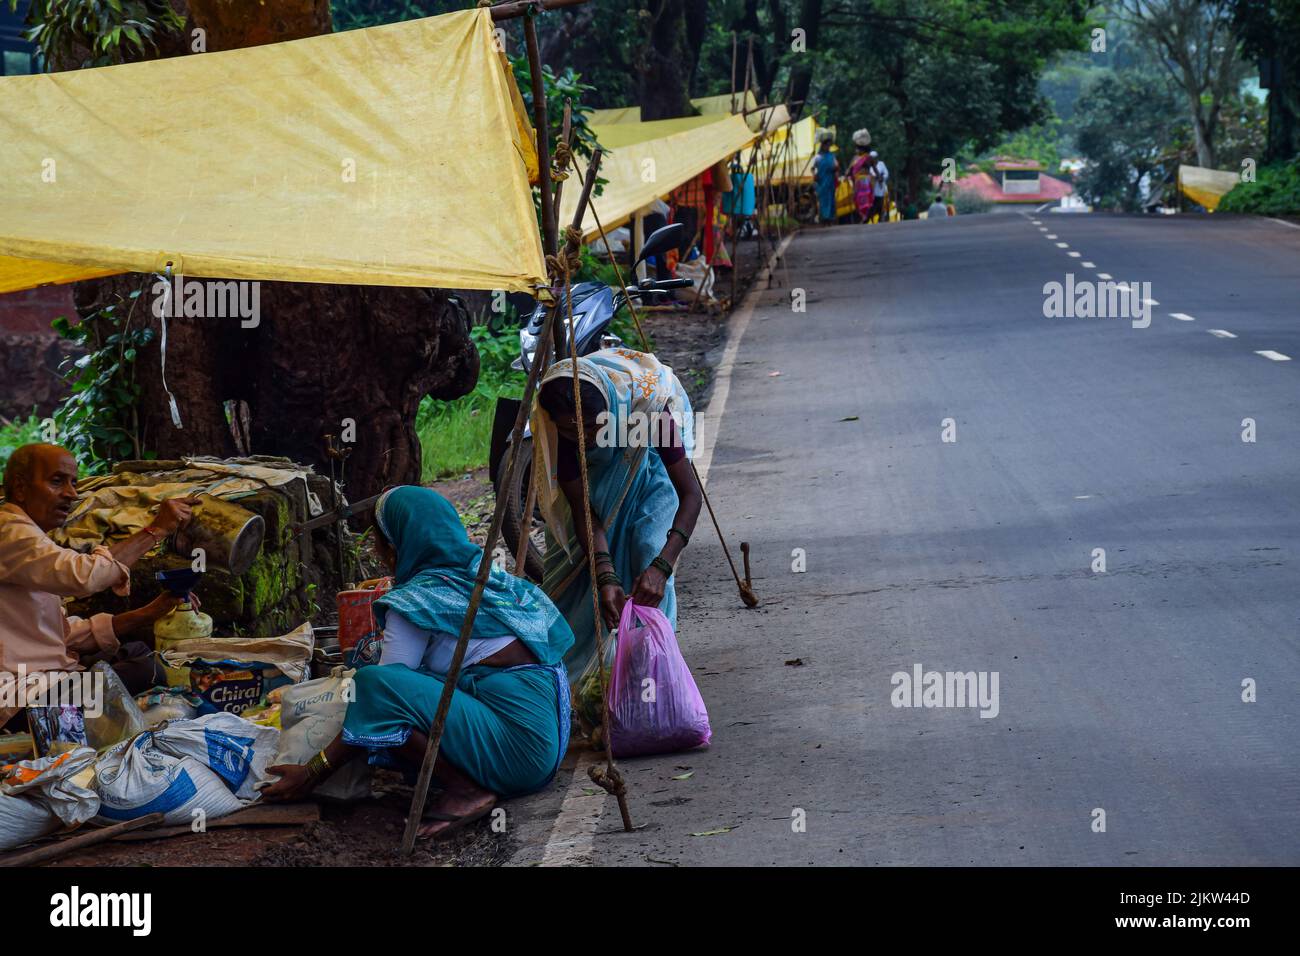 Kolhapur ,India- September 15th 2019; stock photo of 50 to 60 age group Indian women wearing saree buying groceries from street vendor in village week Stock Photo